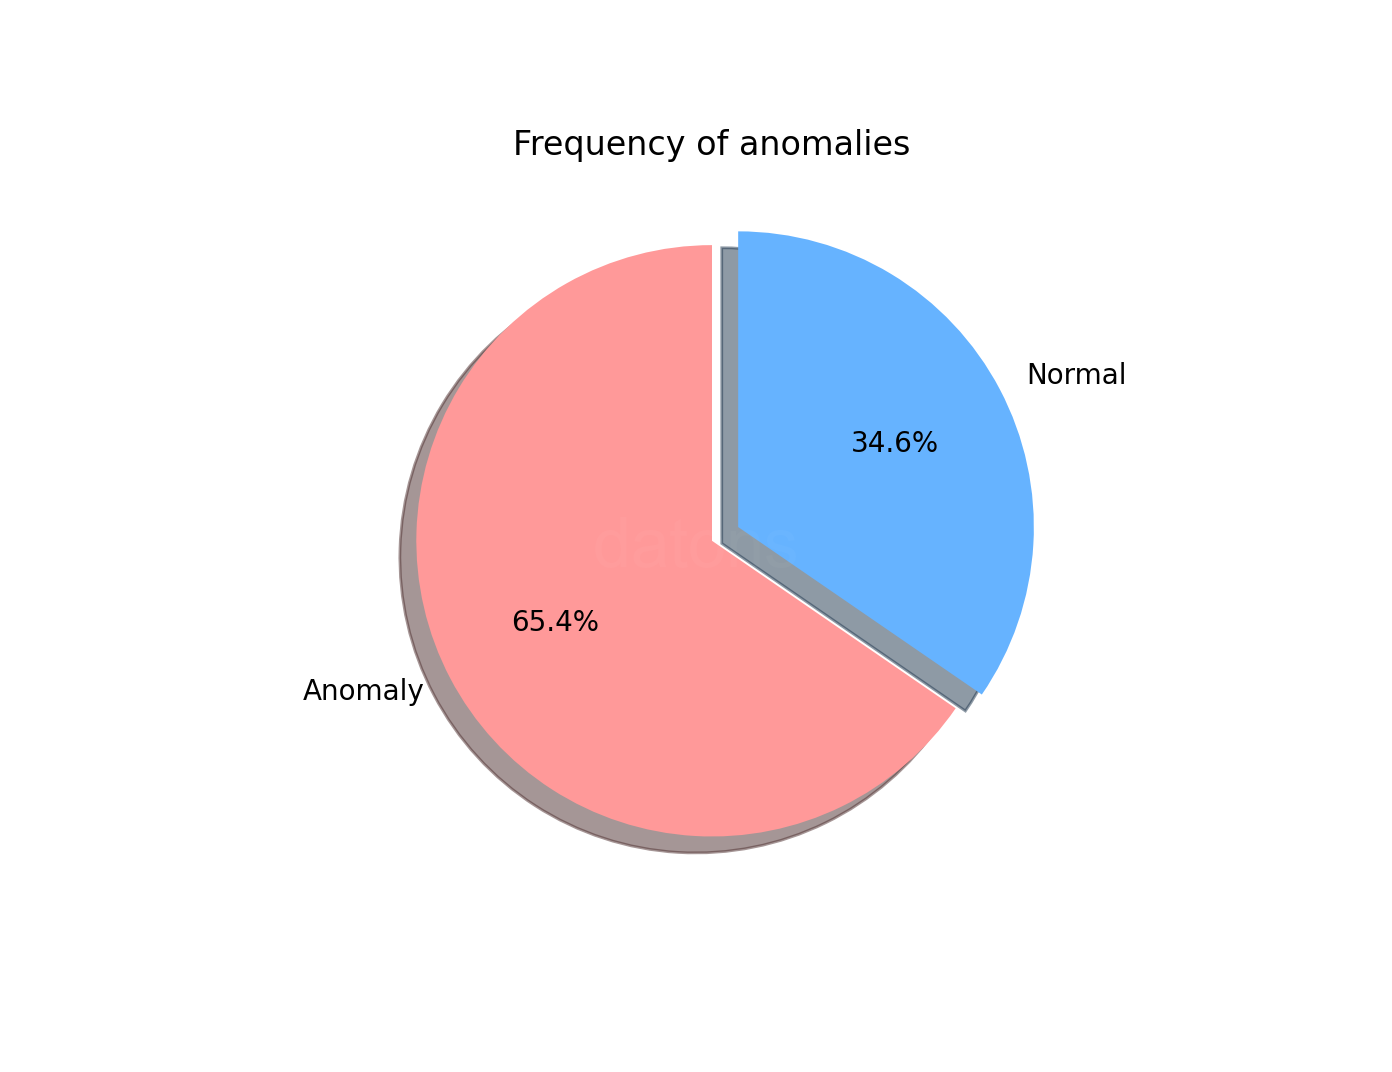 Analysis of the percentage of bids considered anomalous according to the automatic setting of the Isolation Forest algorithm, highlighting the proportion of data labeled as normal versus anomalous.